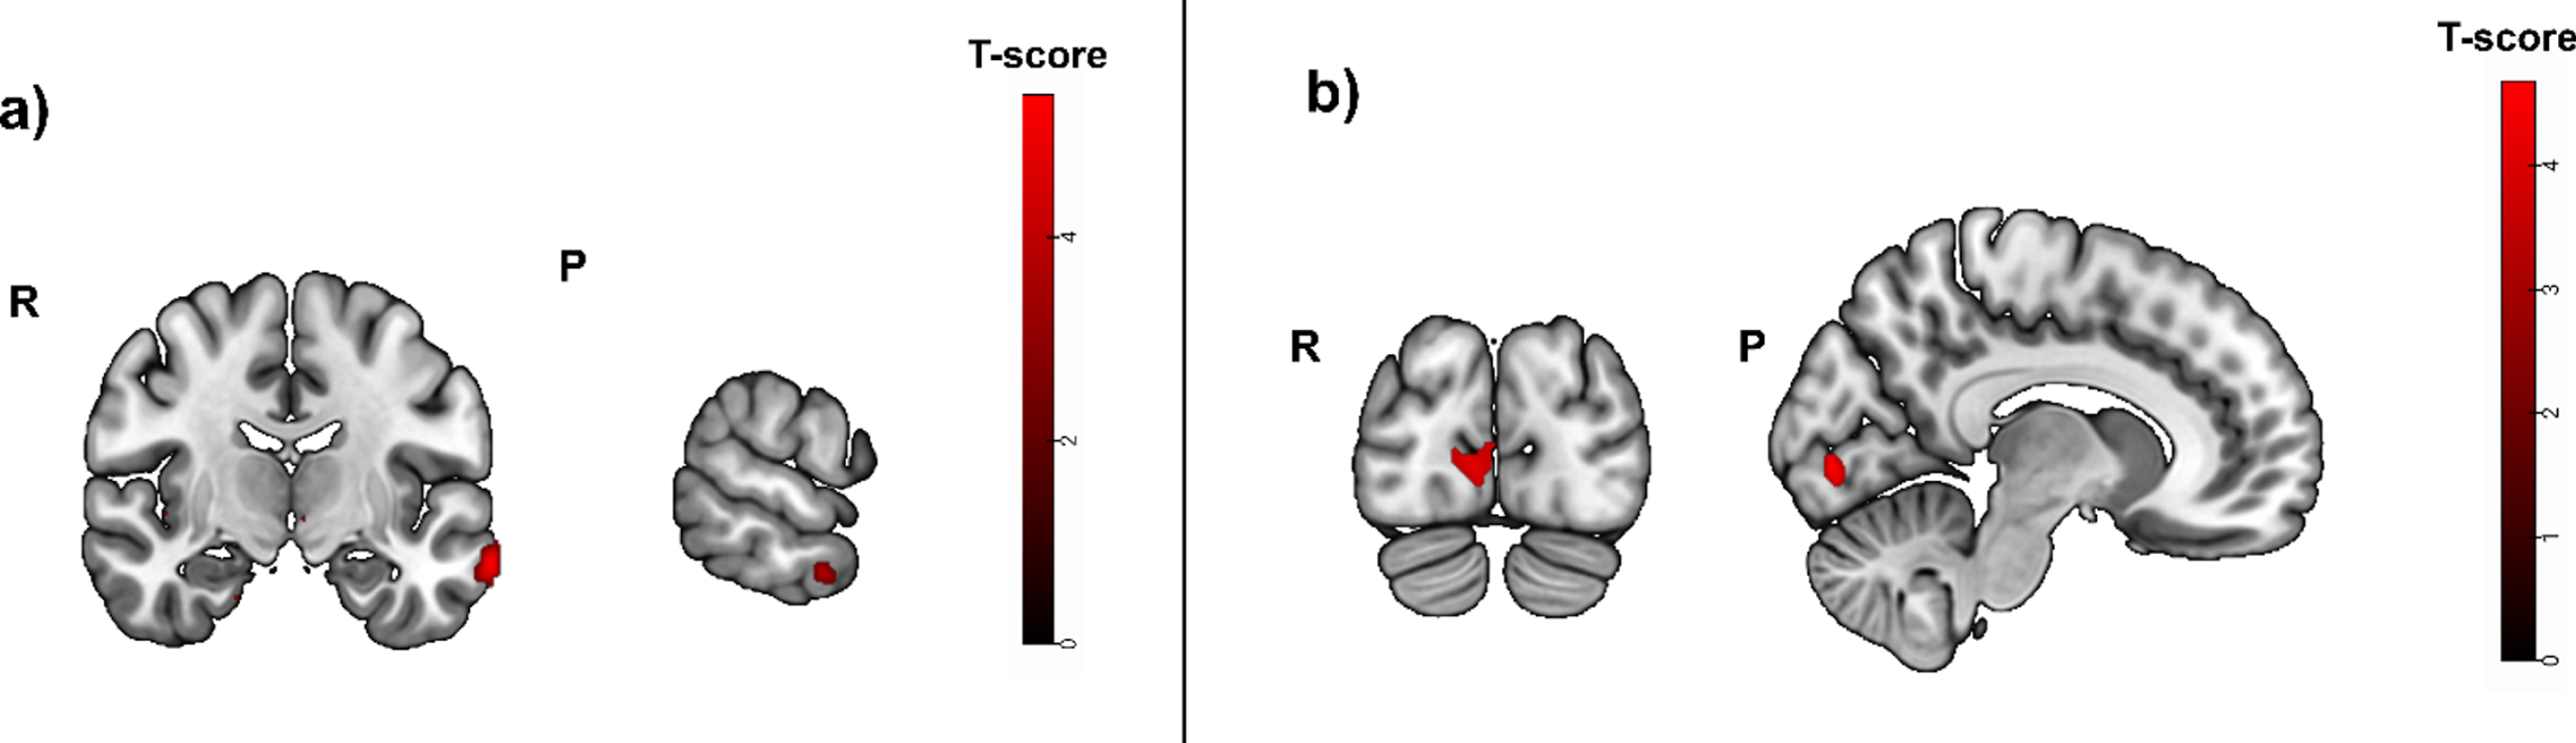 Greater activity related to greater hippocampal atrophy in the episodic memory task (cued recall > control contrast, puncorrected < 0.01), used as mask in a subsample with positive blood biomarkers for amyloid positivity. Activity was detected in the left middle temporal gyrus, the right angular gyrus and left cerebral white mater/temporal pole. b) Greater activity related to high episodic memory task accuracy (cued recall > control contrast, before masking) was located in the right calcarine cortex, the left middle frontal gyrus, the left cerebral white matter and opercular part of the inferior frontal gyrus. R, right; P, posterior.